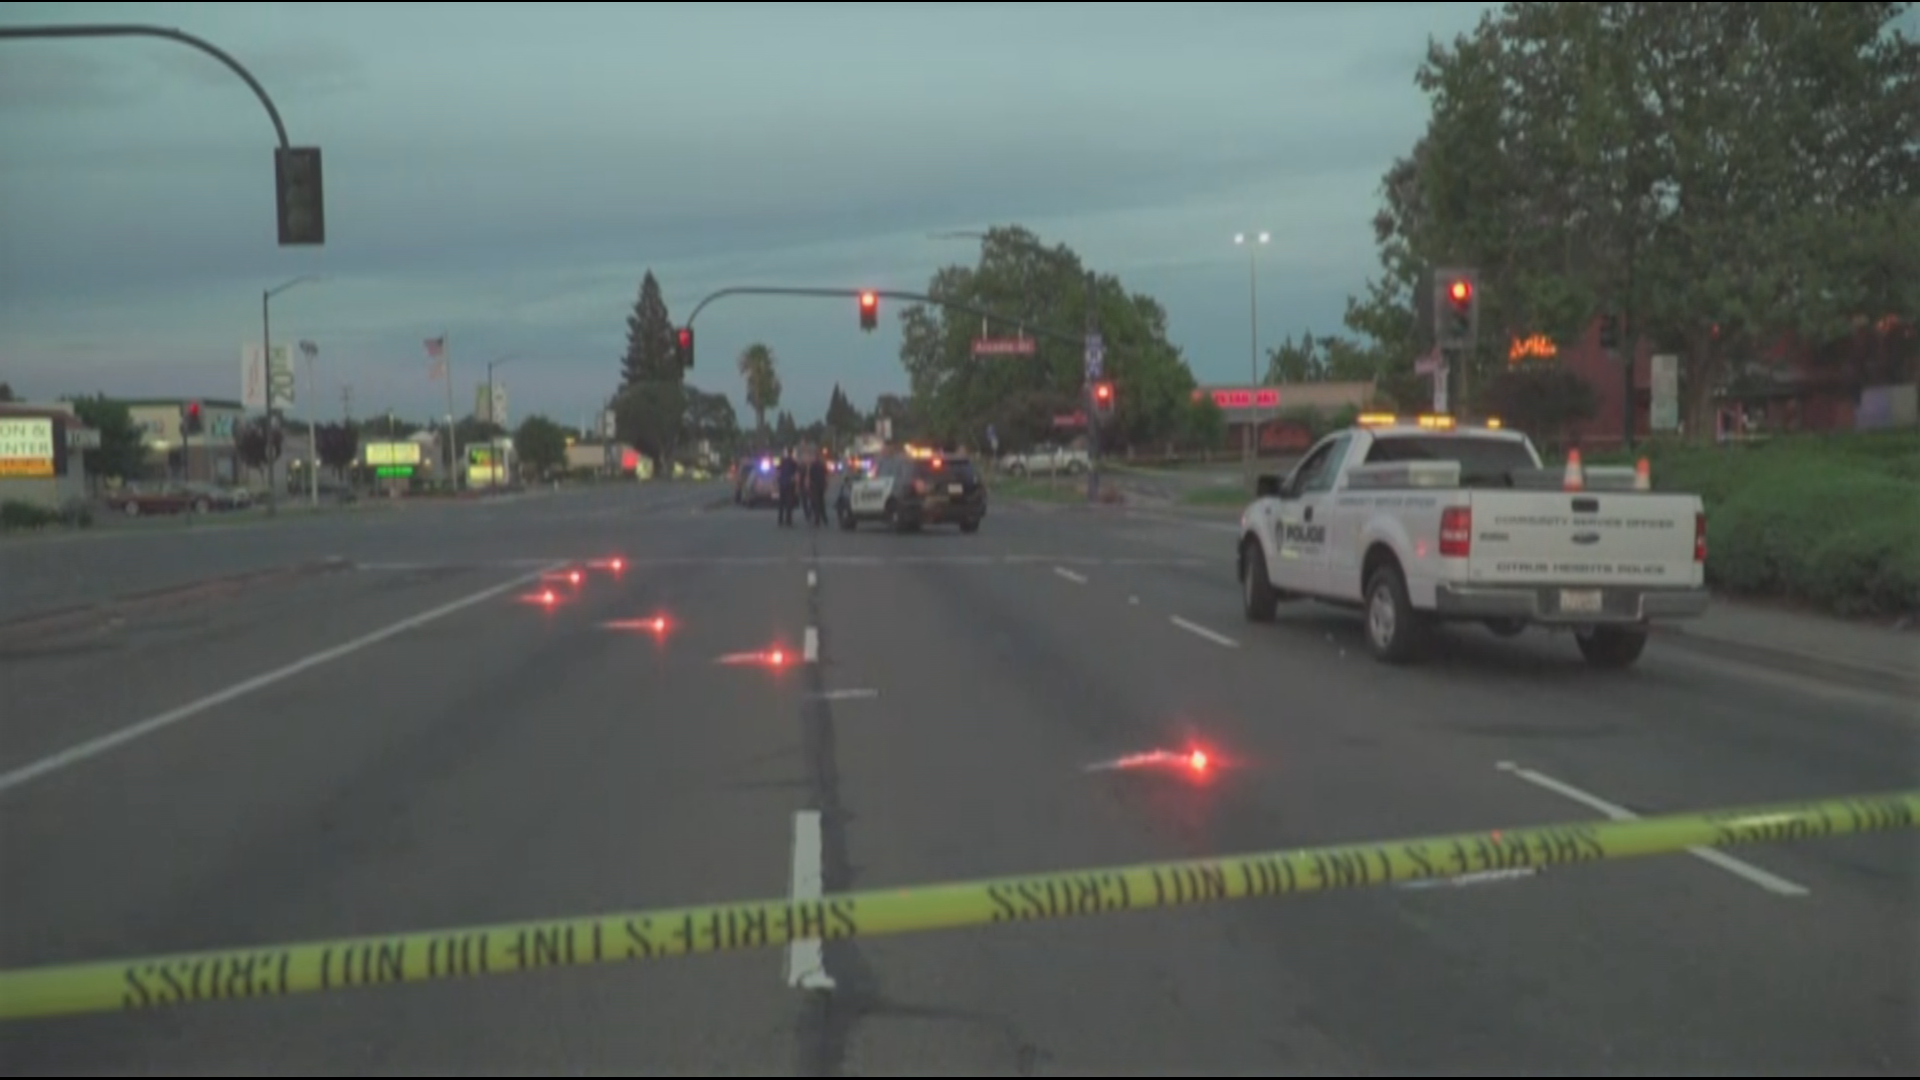 A man is dead and a police K9 injured after a shooting near Sunrise Mall in Citrus Heights Tuesday night.